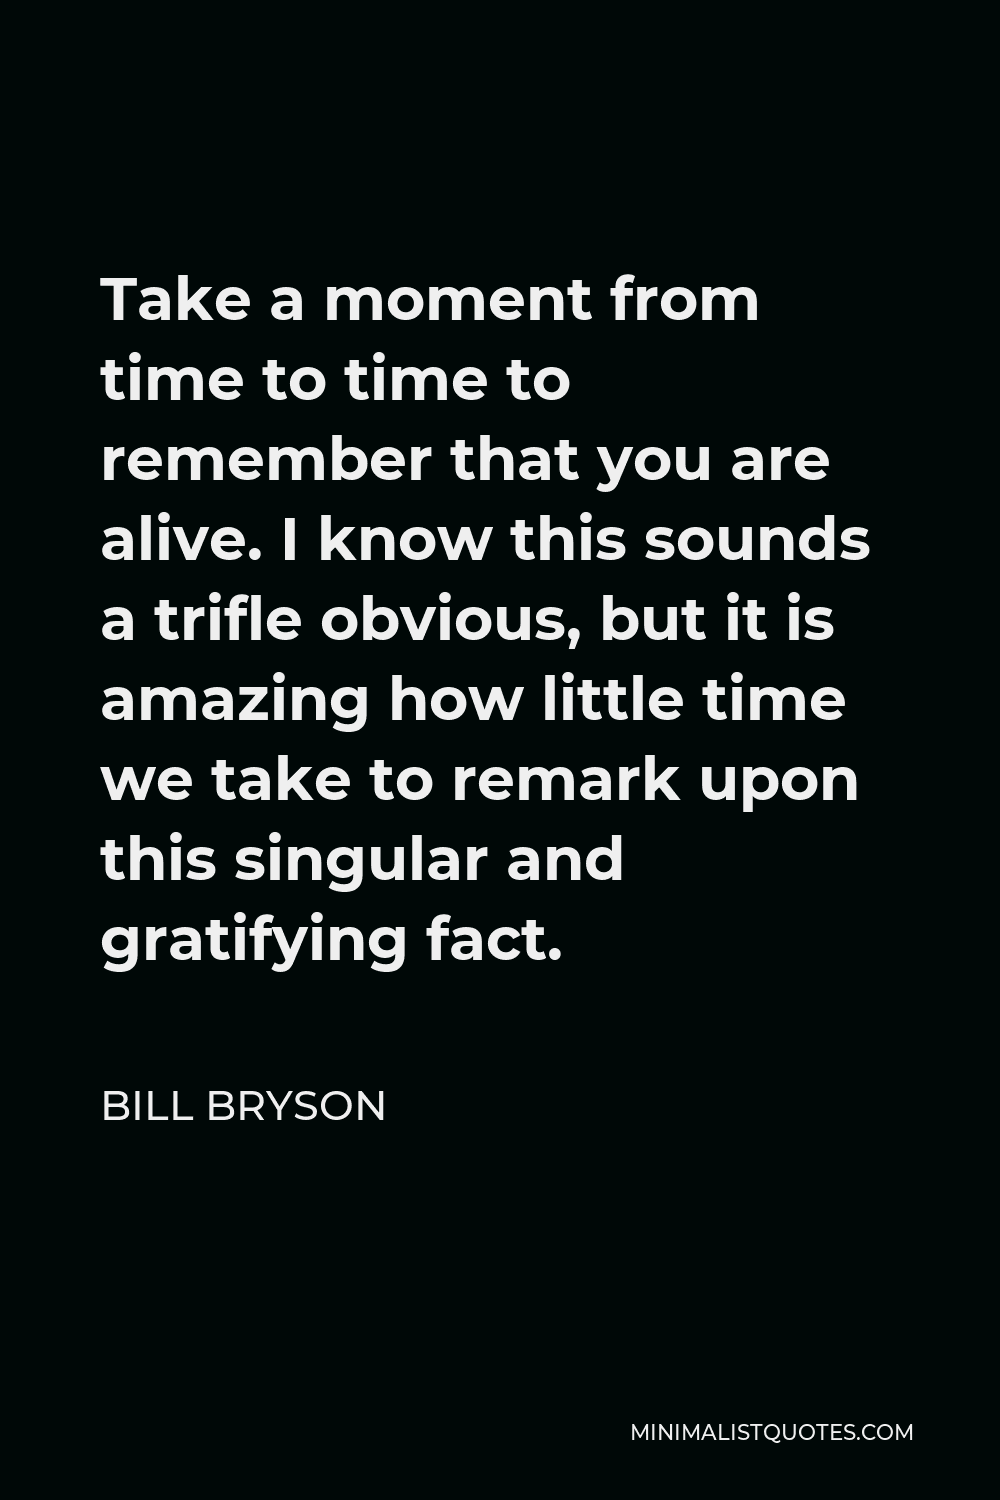 Bill Bryson Quote - Take a moment from time to time to remember that you are alive. I know this sounds a trifle obvious, but it is amazing how little time we take to remark upon this singular and gratifying fact.